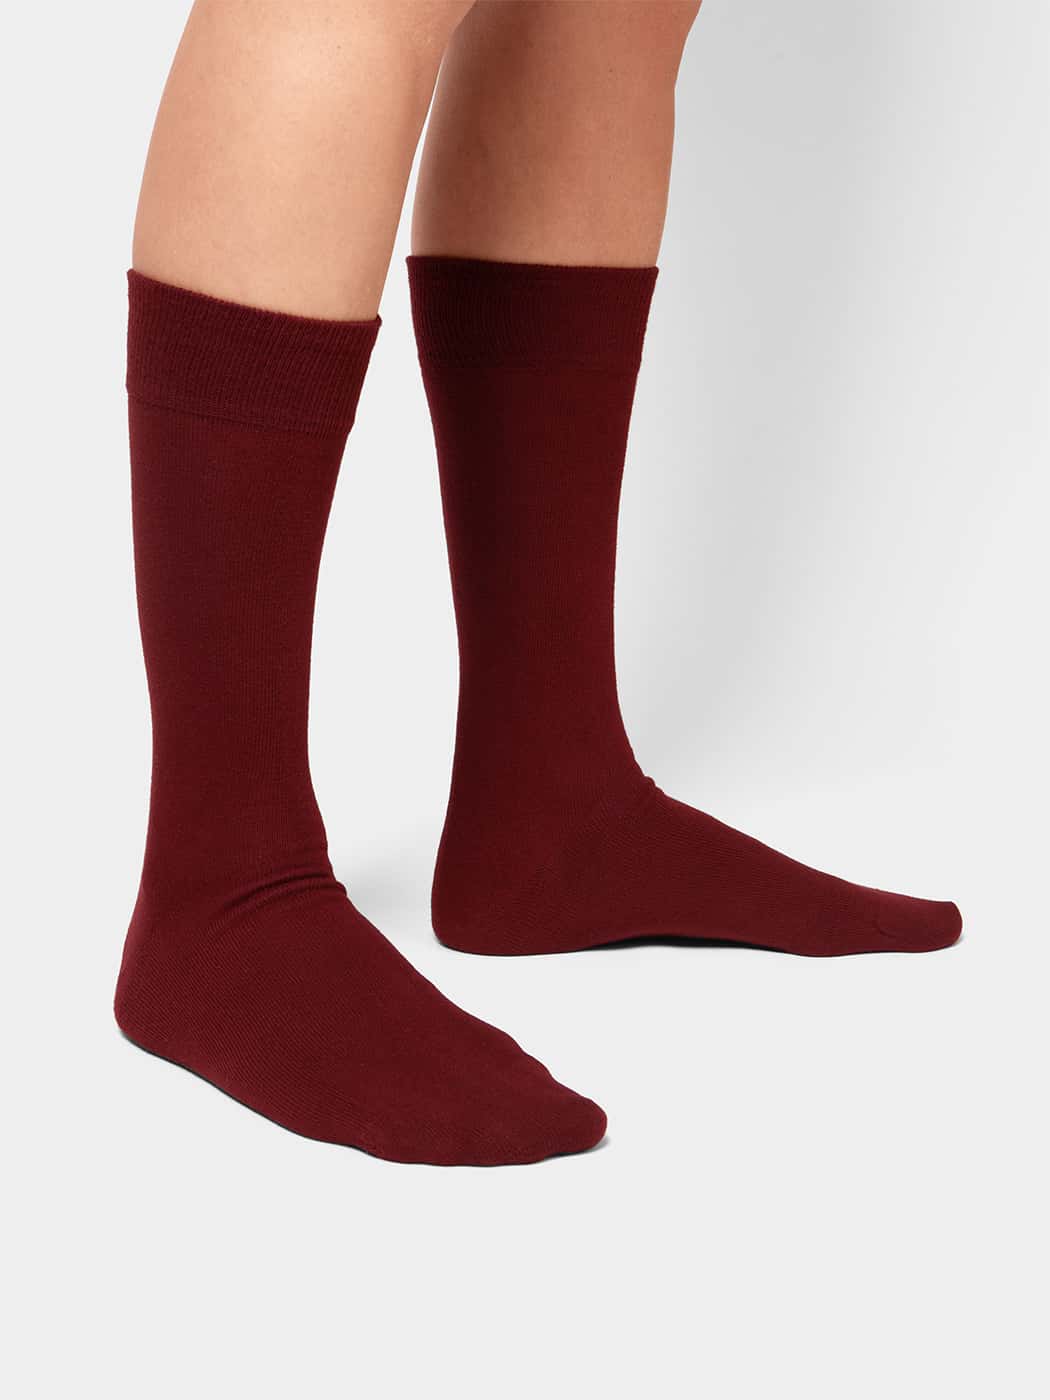 Pack of 3 pairs of plain red socks